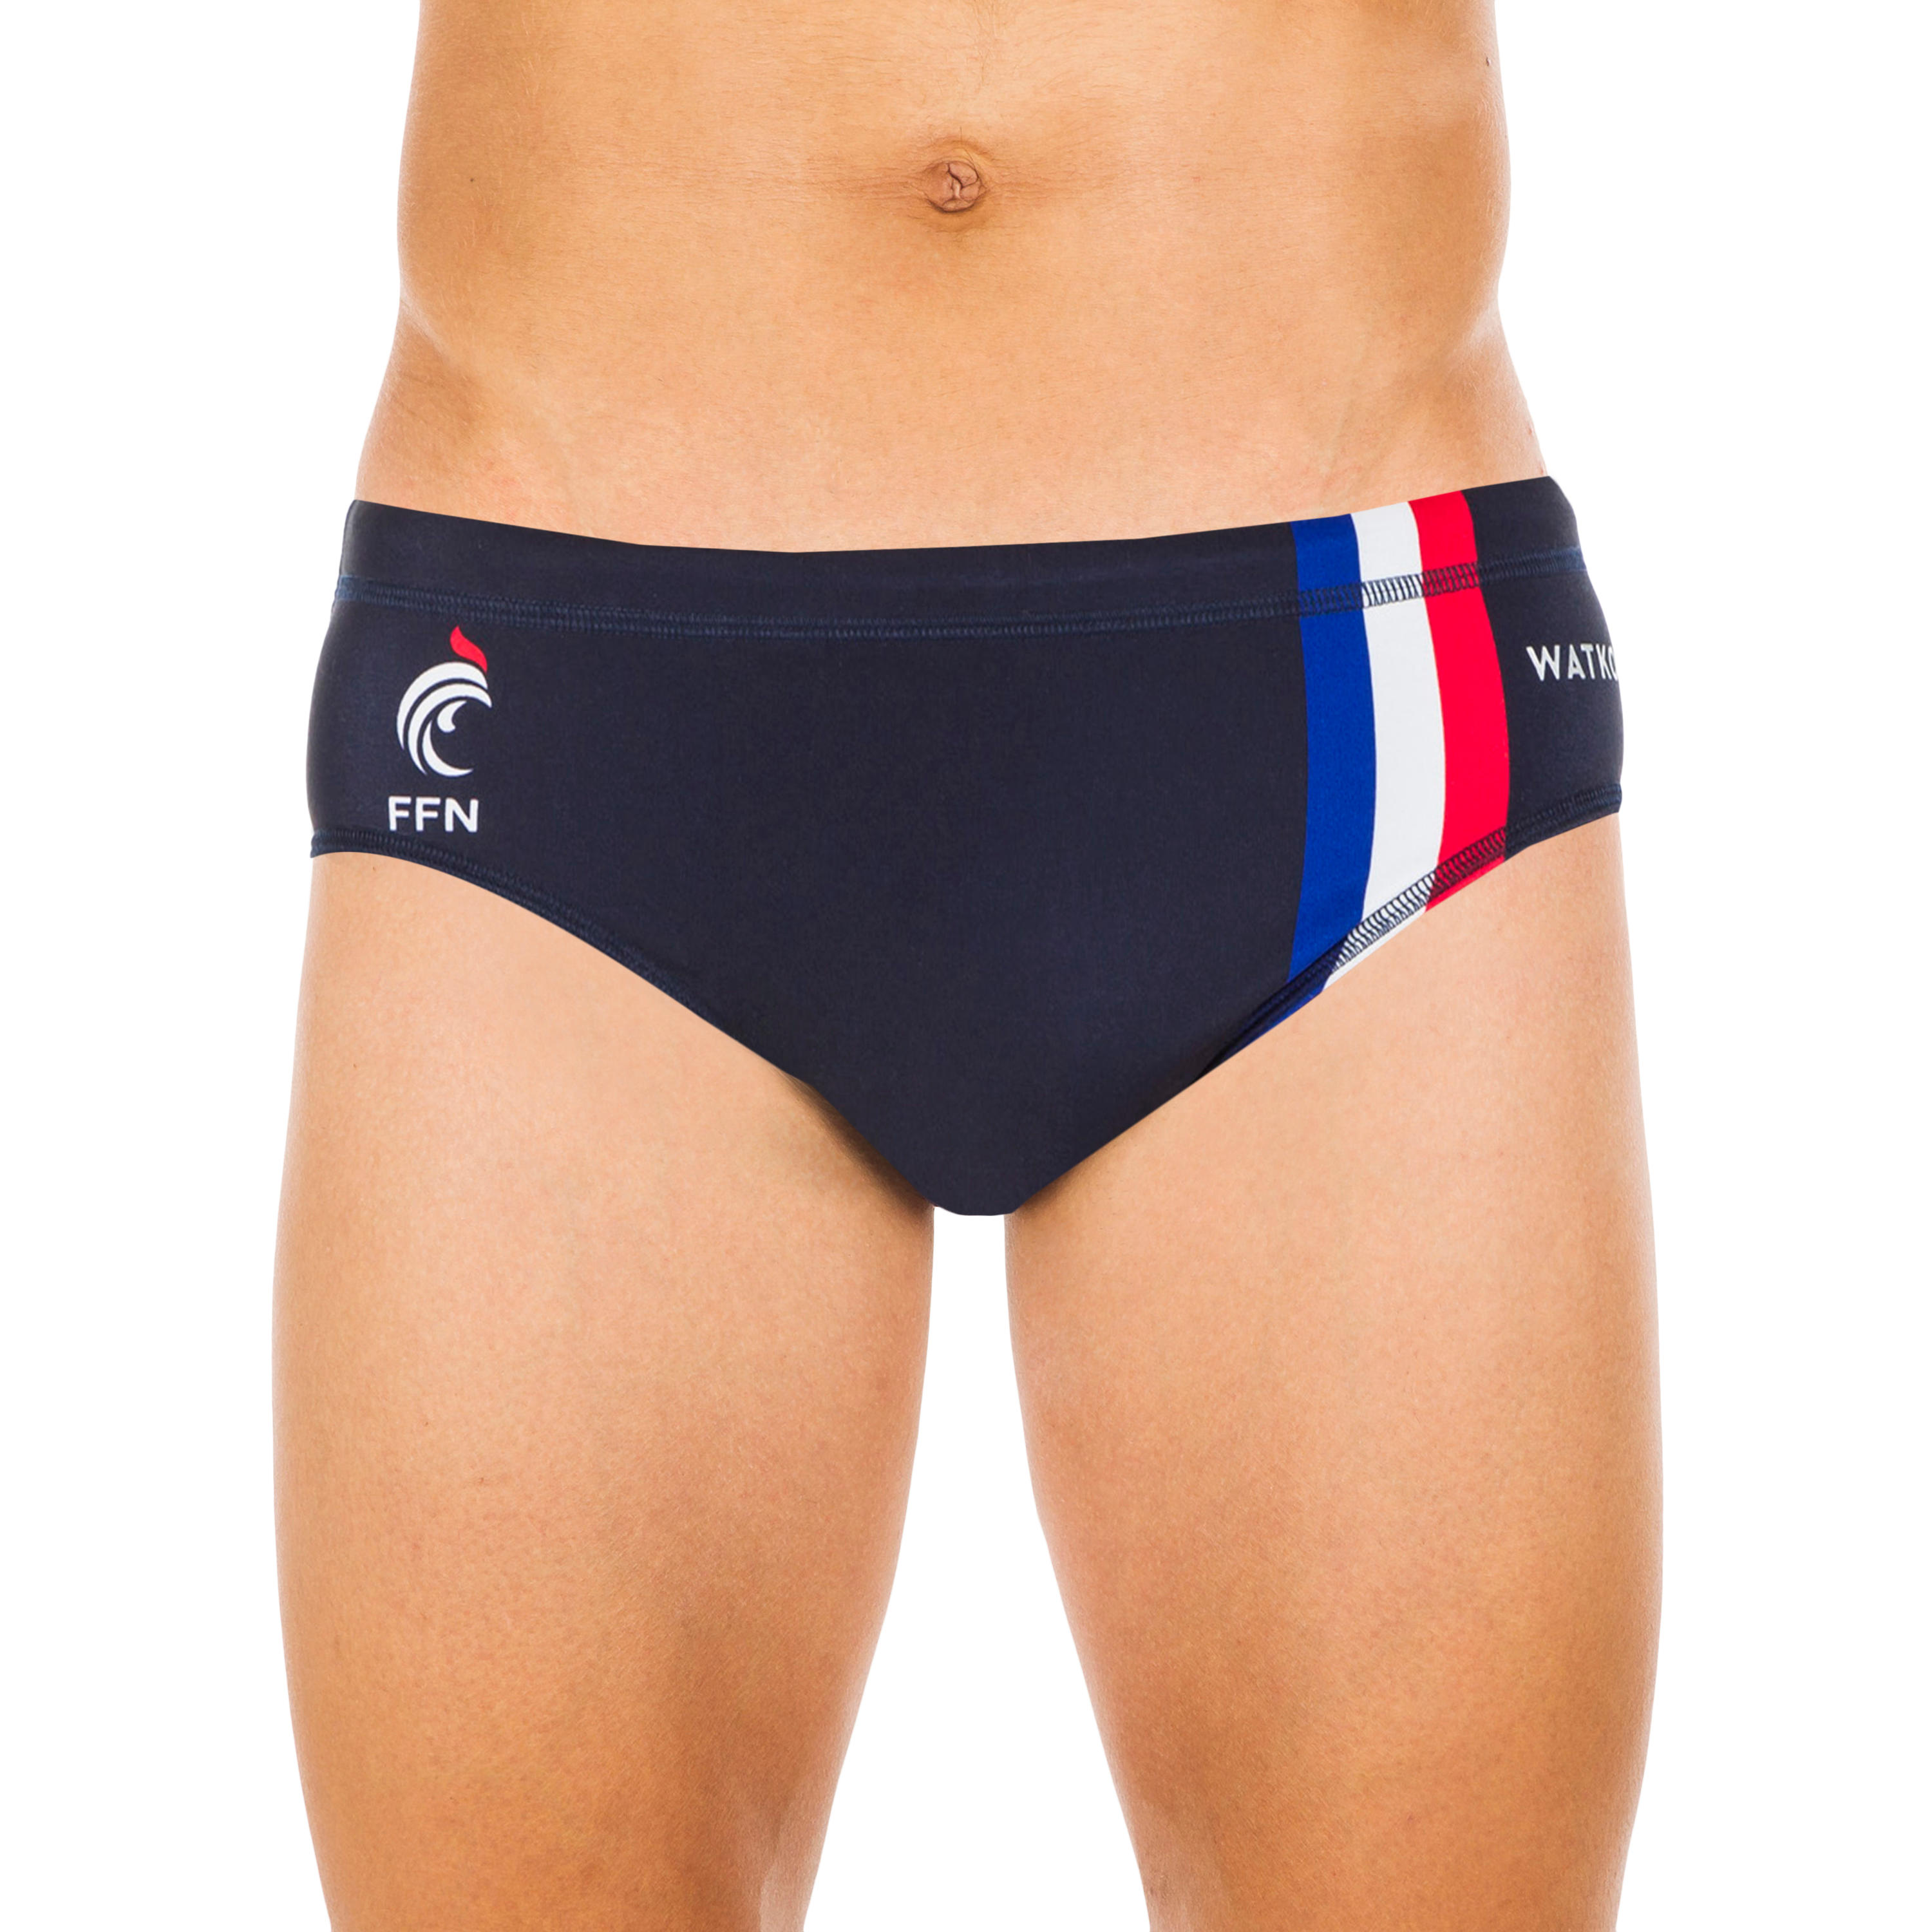 MEN'S WATER POLO SWIMMING BRIEFS - OFFICIAL FRANCE 1/5